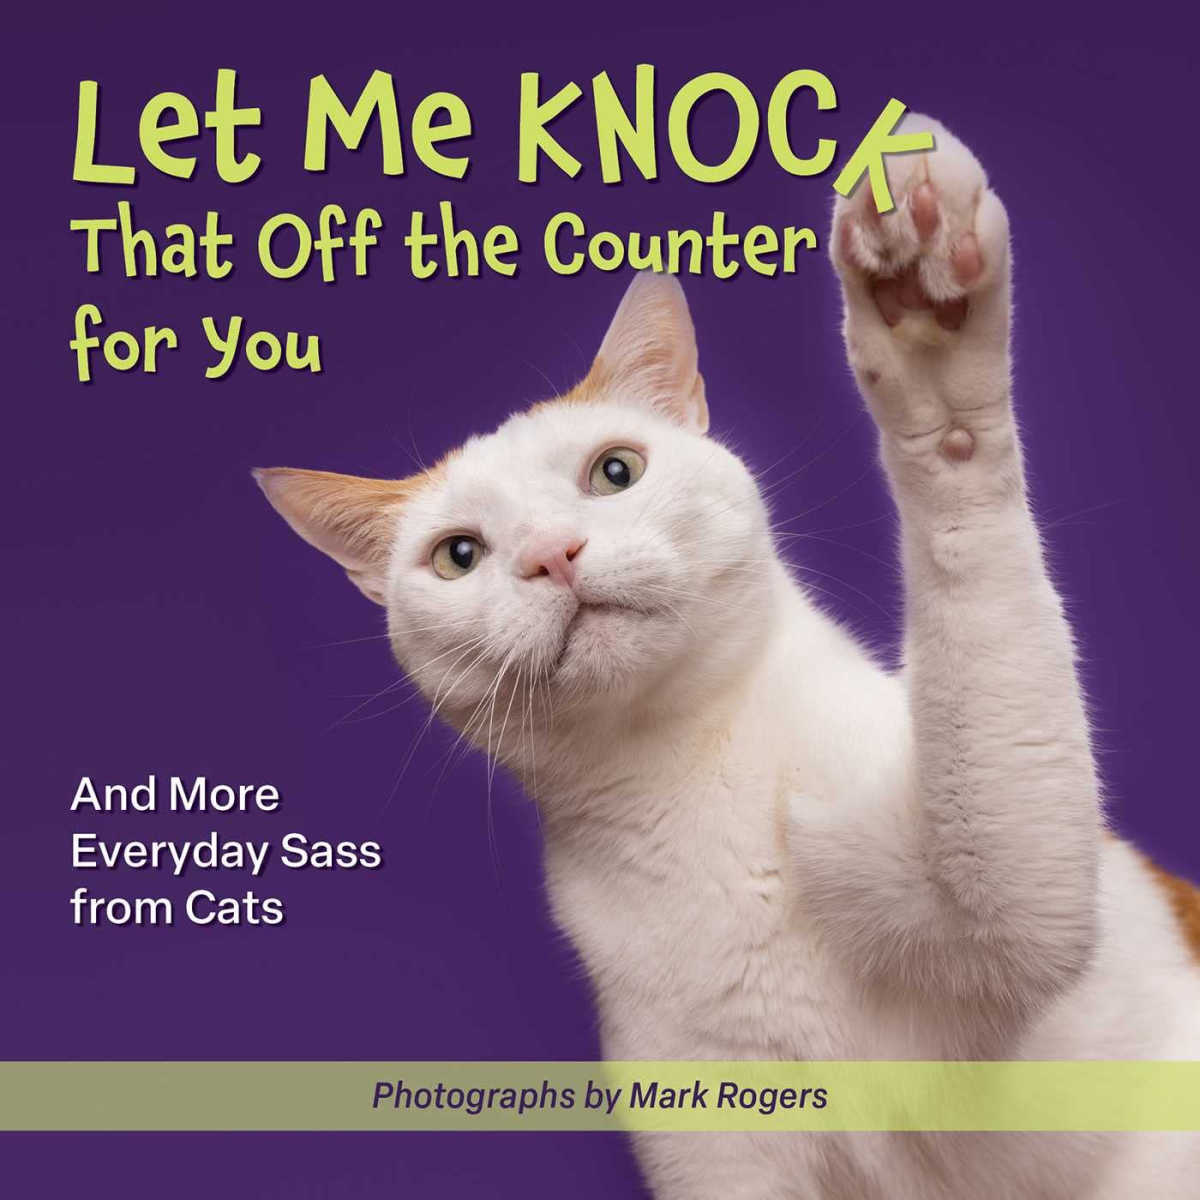 cat humor book Let Me Knock That Off the Counter for You